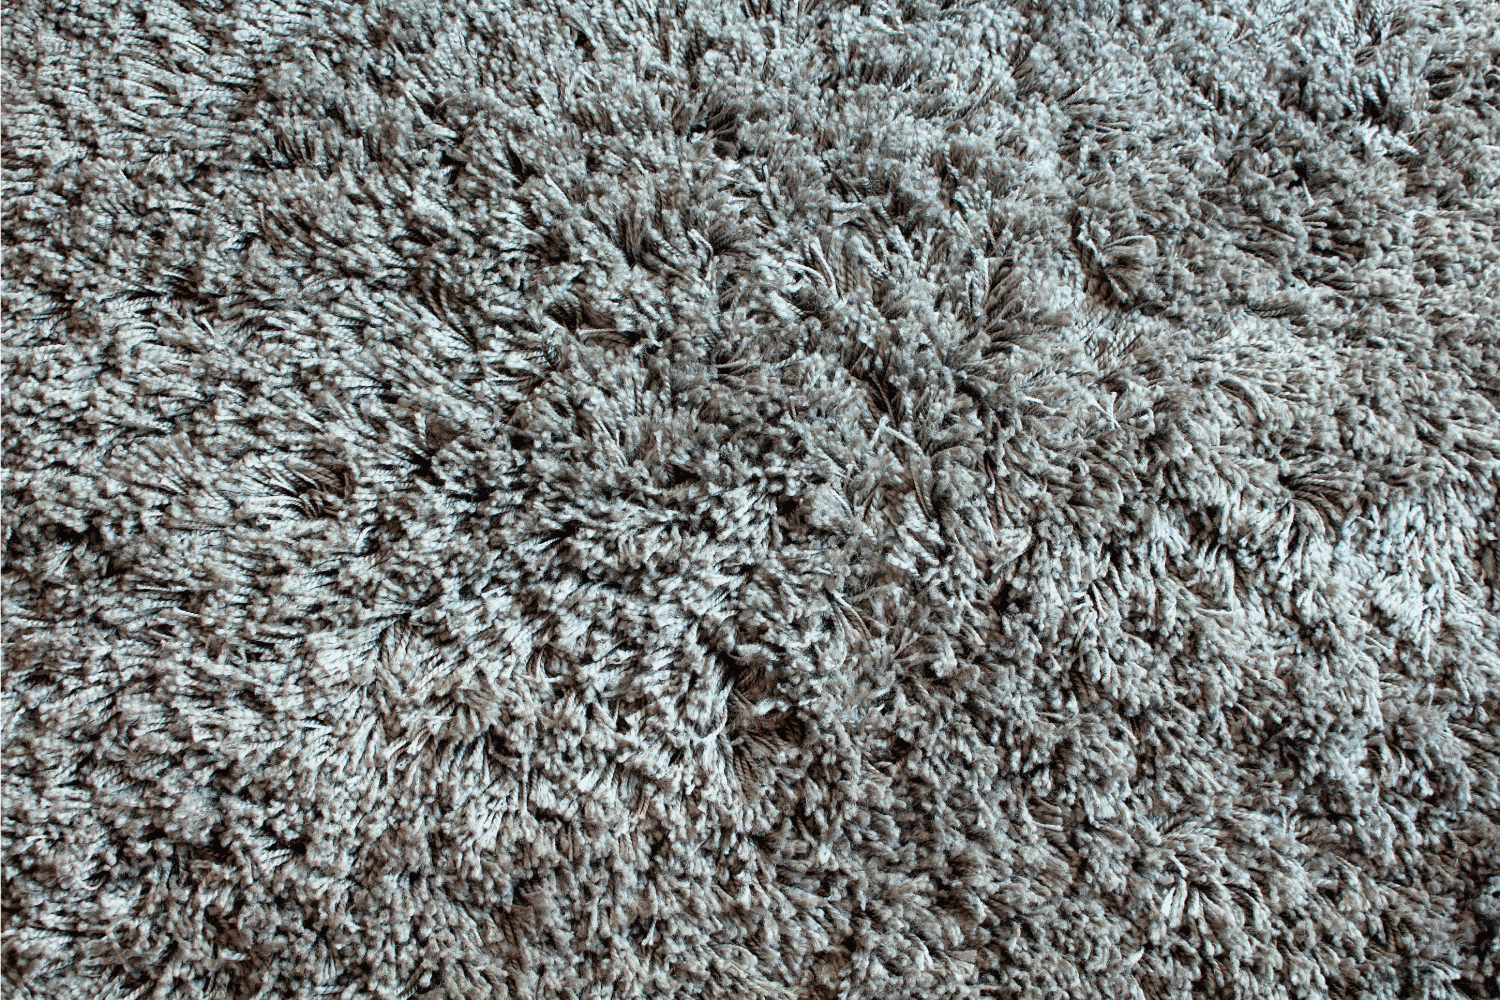 Close up view of wool, grey rug or carpet background. 12 Most Plush Types of Carpet [By Fiber And Pile]